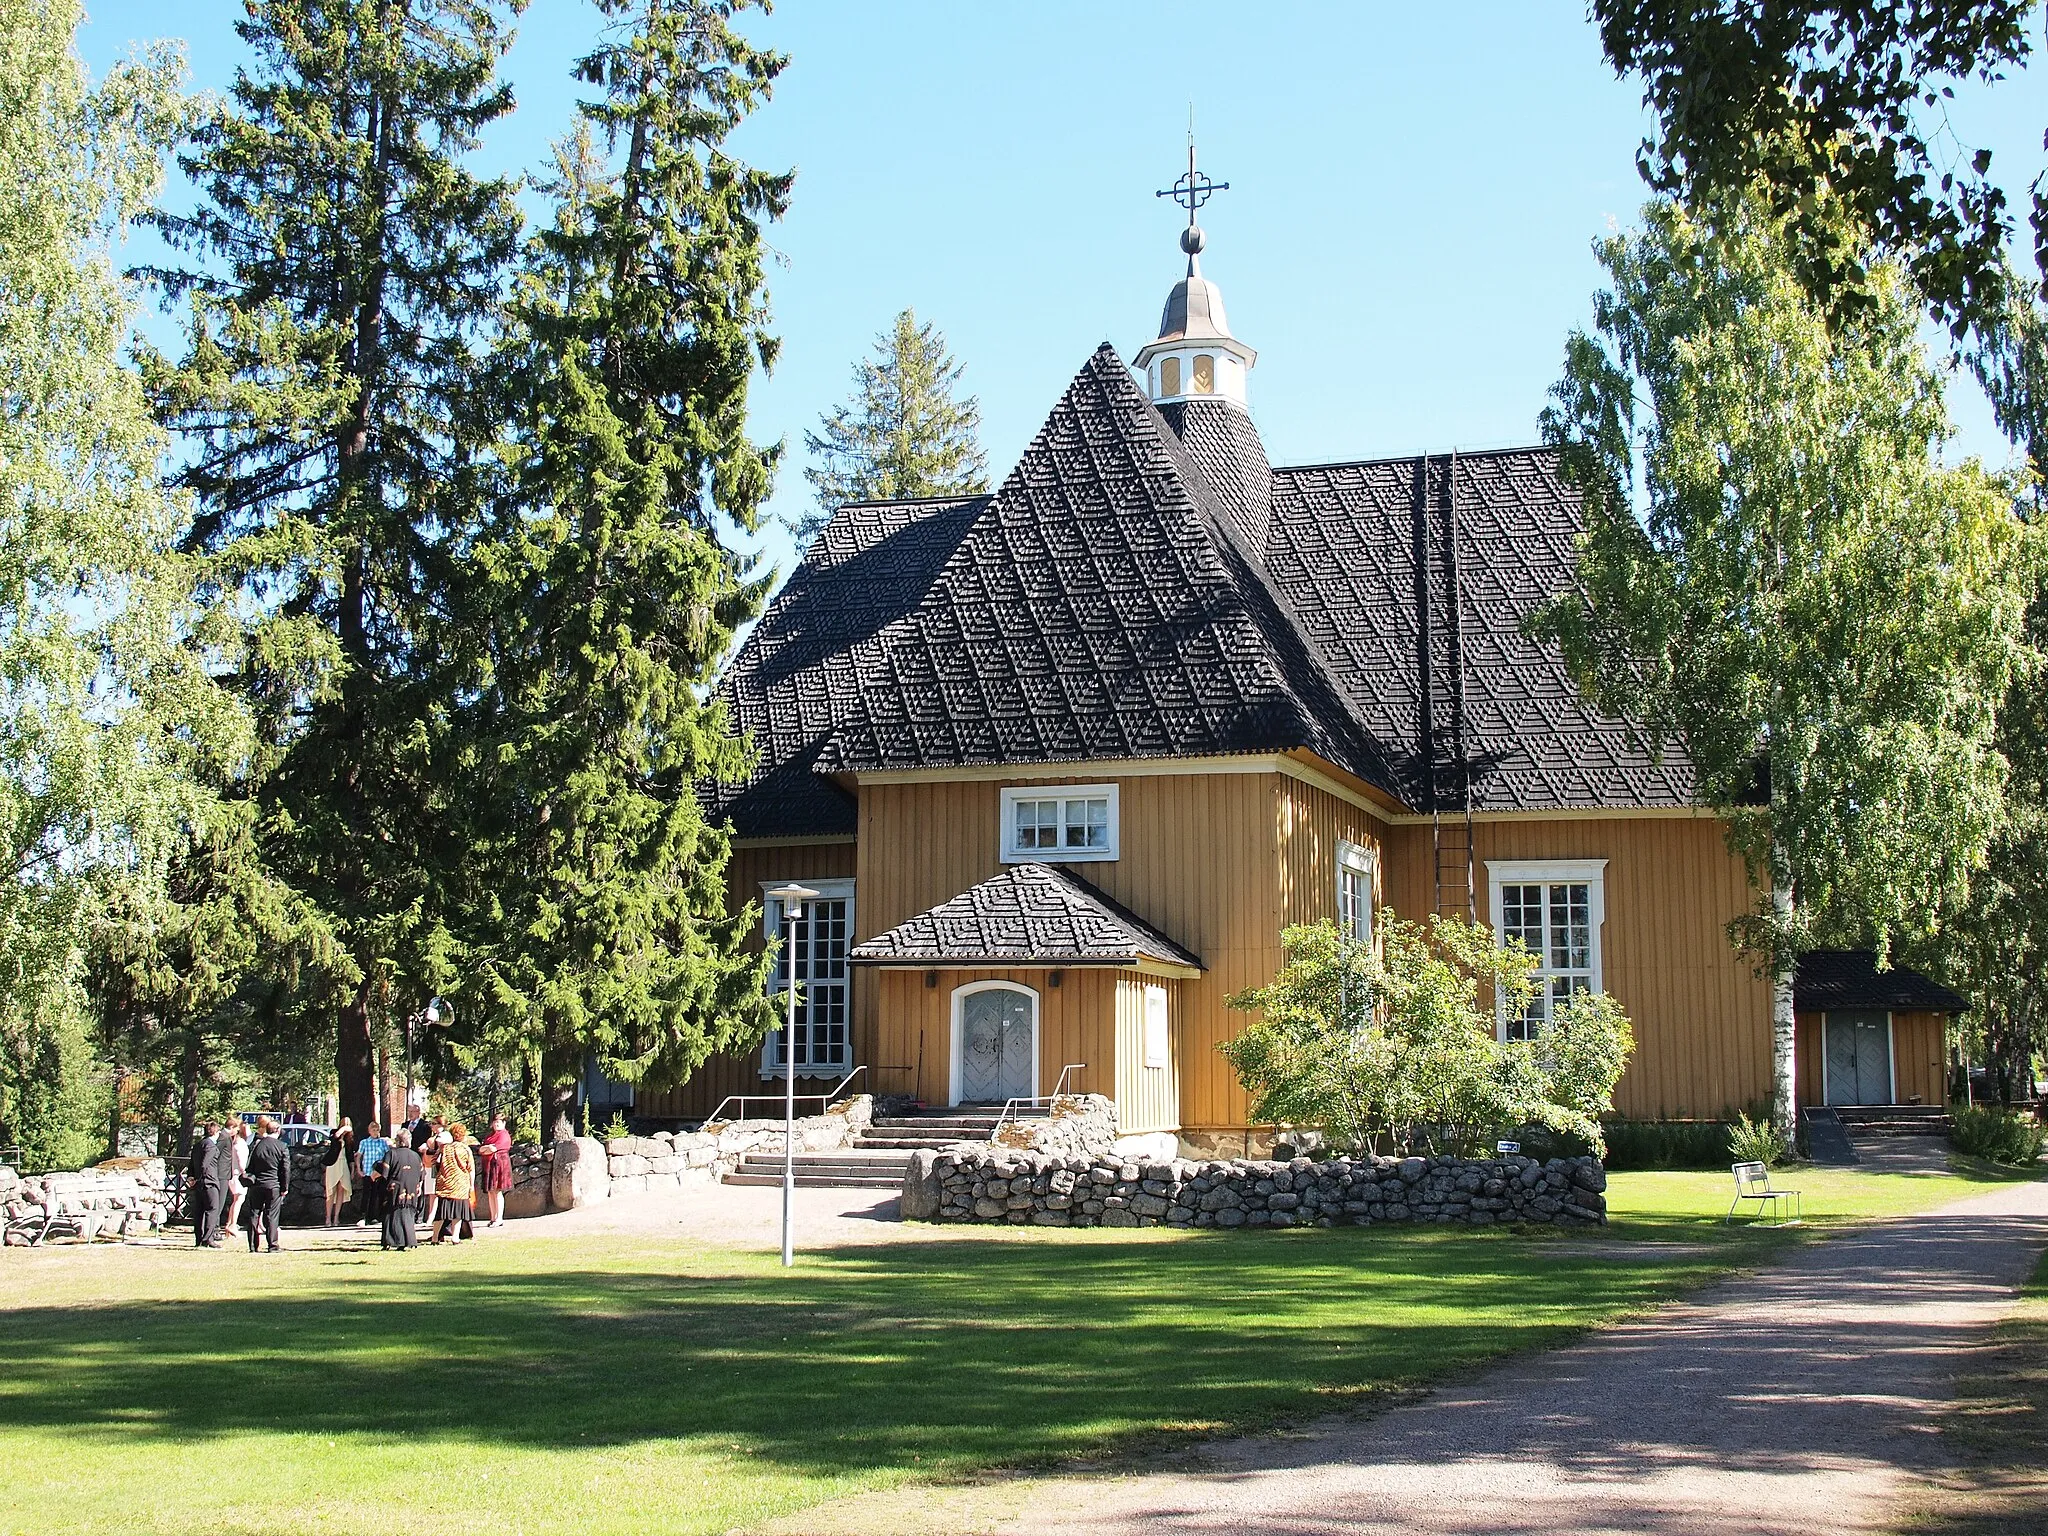 Photo showing: Lemi Church is one of the most significant wooden churches in Finland. It was built in 1786 under the supervision of Juhana Salonen, a famed church builder of his time.